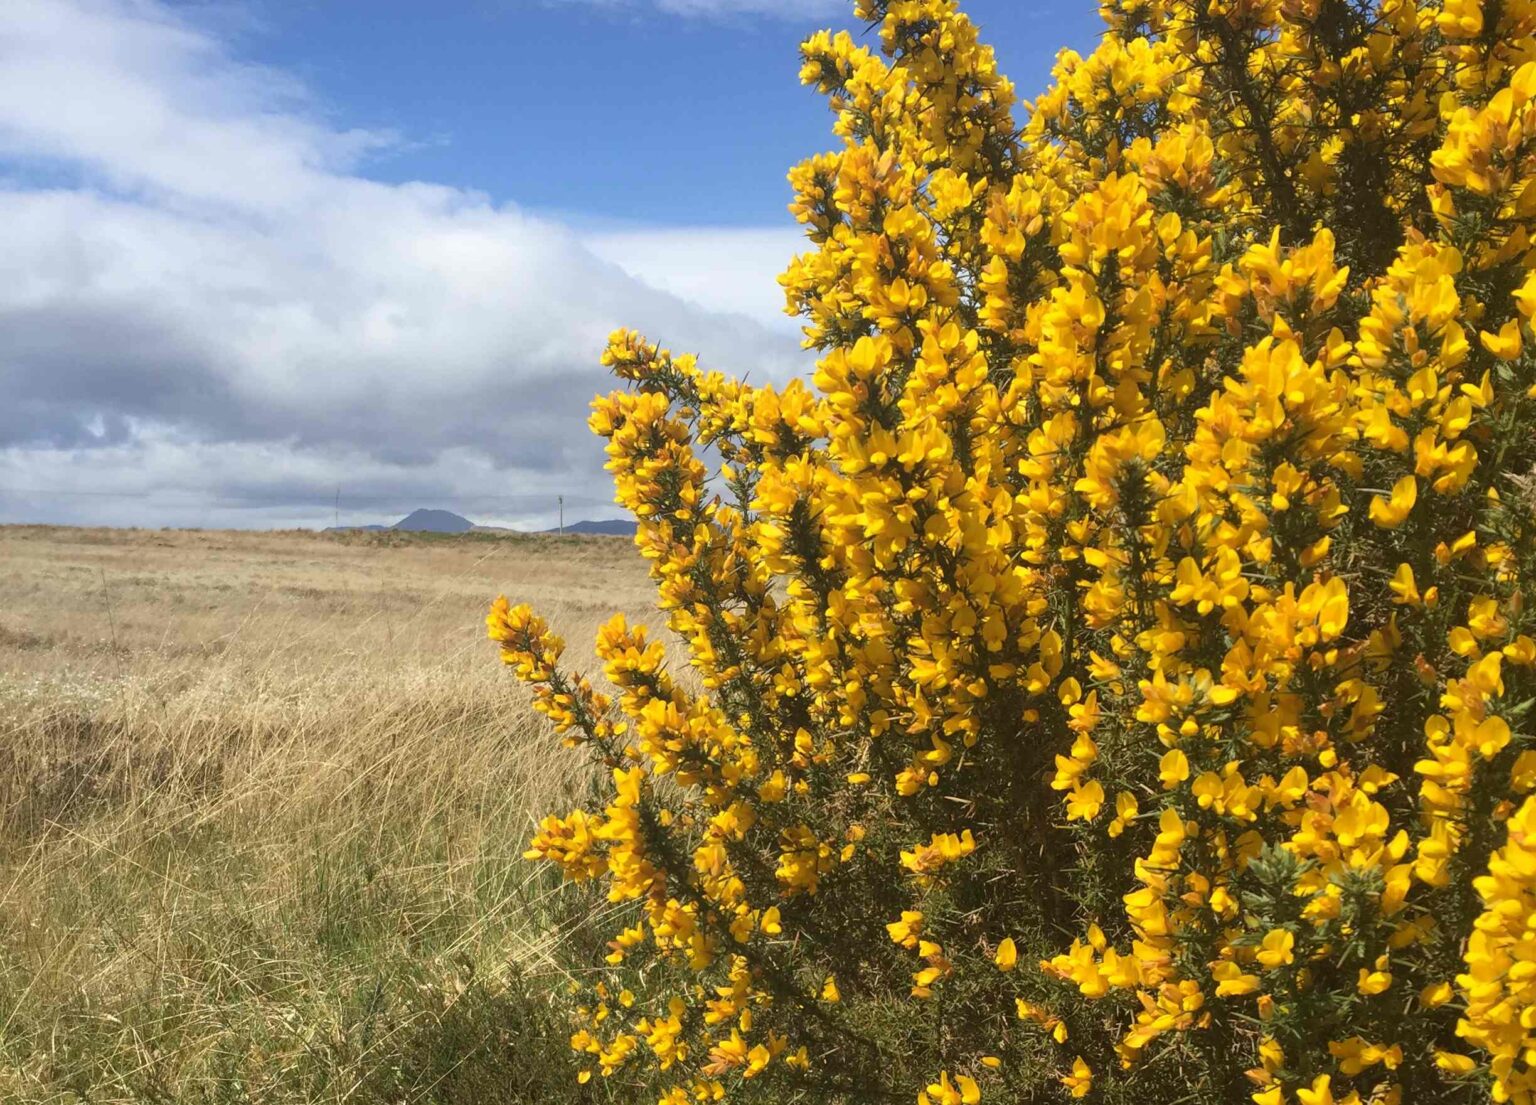 Beautiful display of Gorse while on an RV Tour with Four Seasons Campers